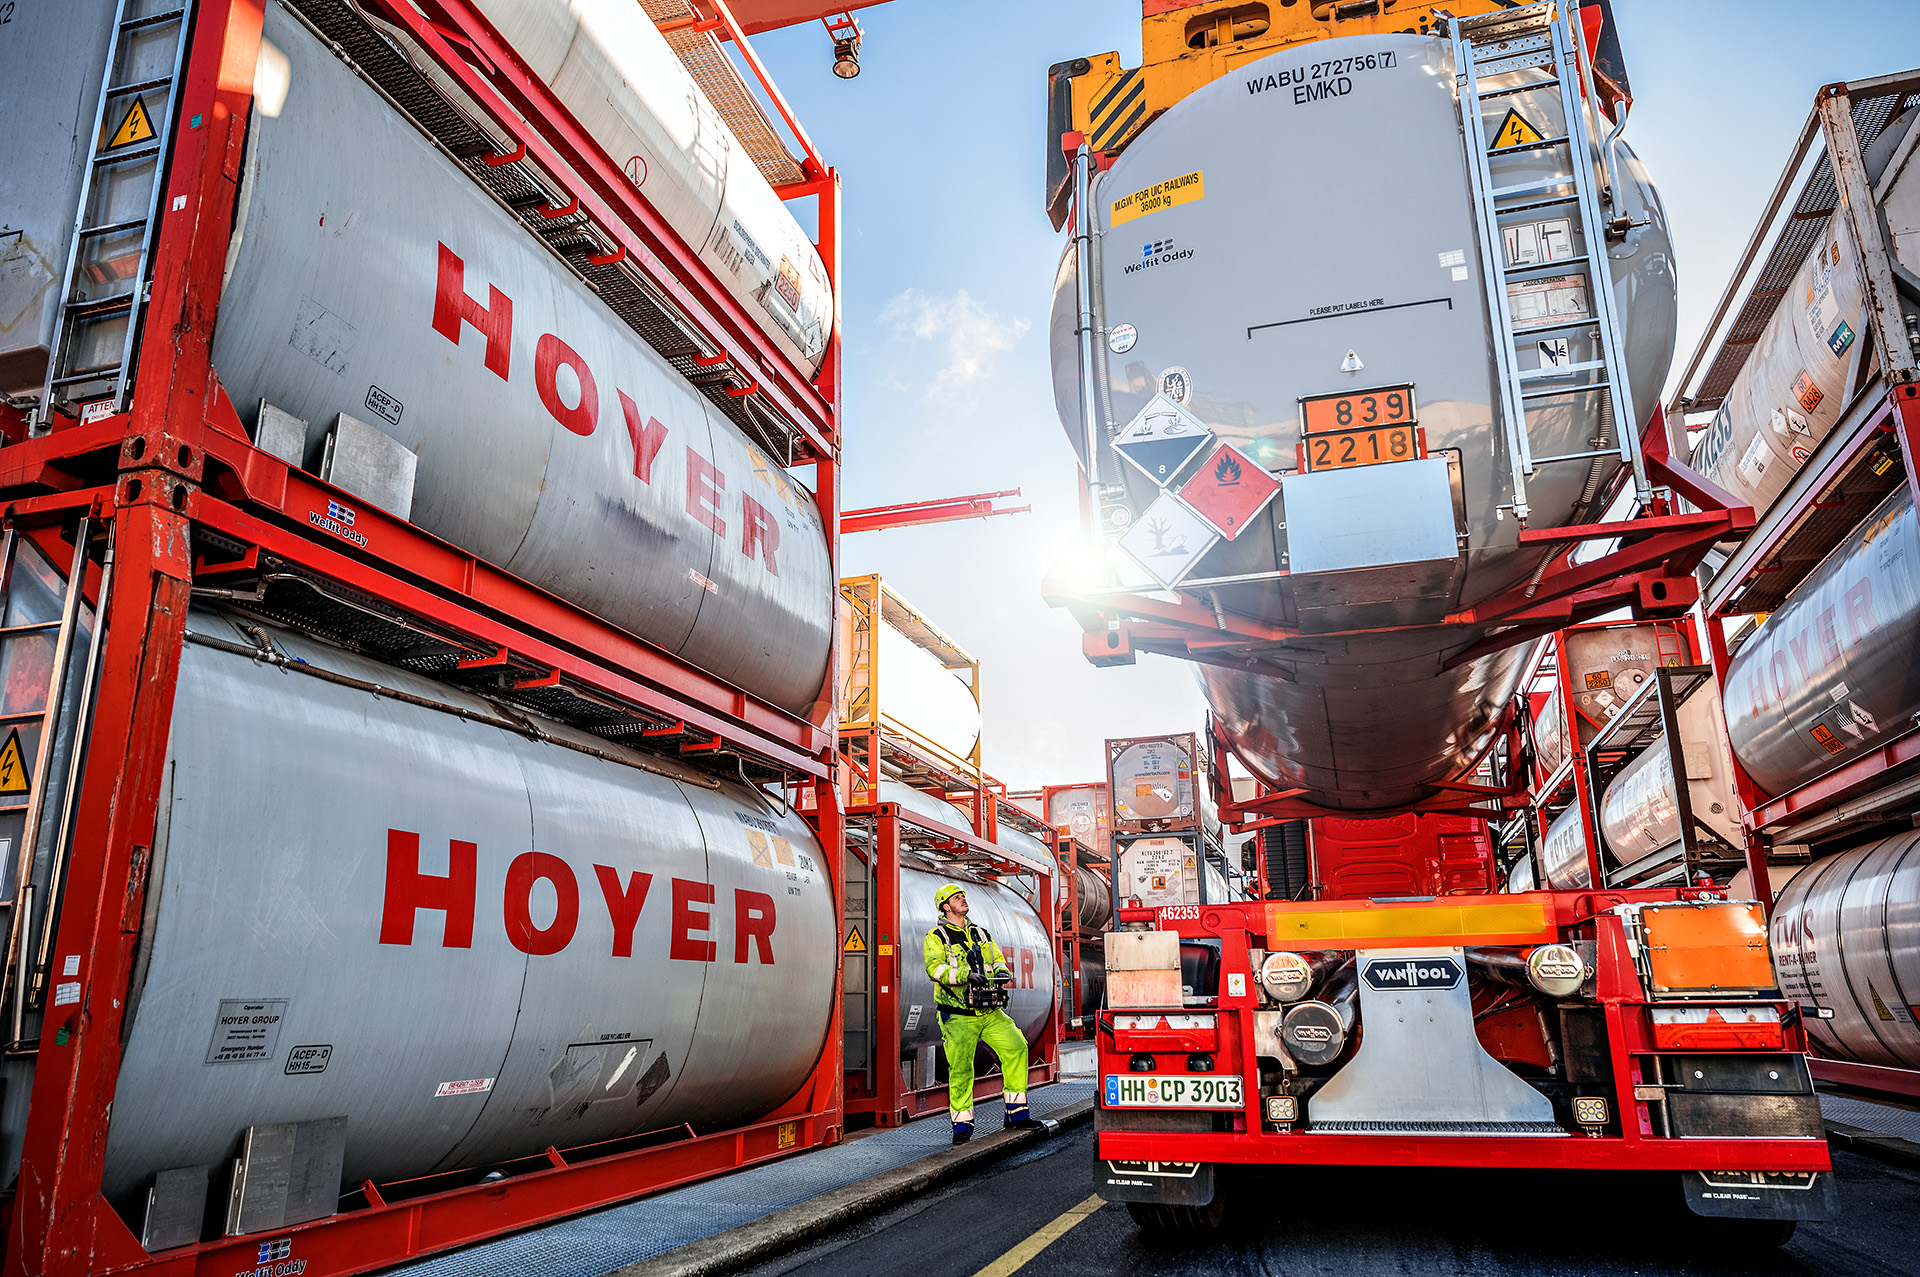 HOYER tankcontainer at the dangerous goods terminal on a crane